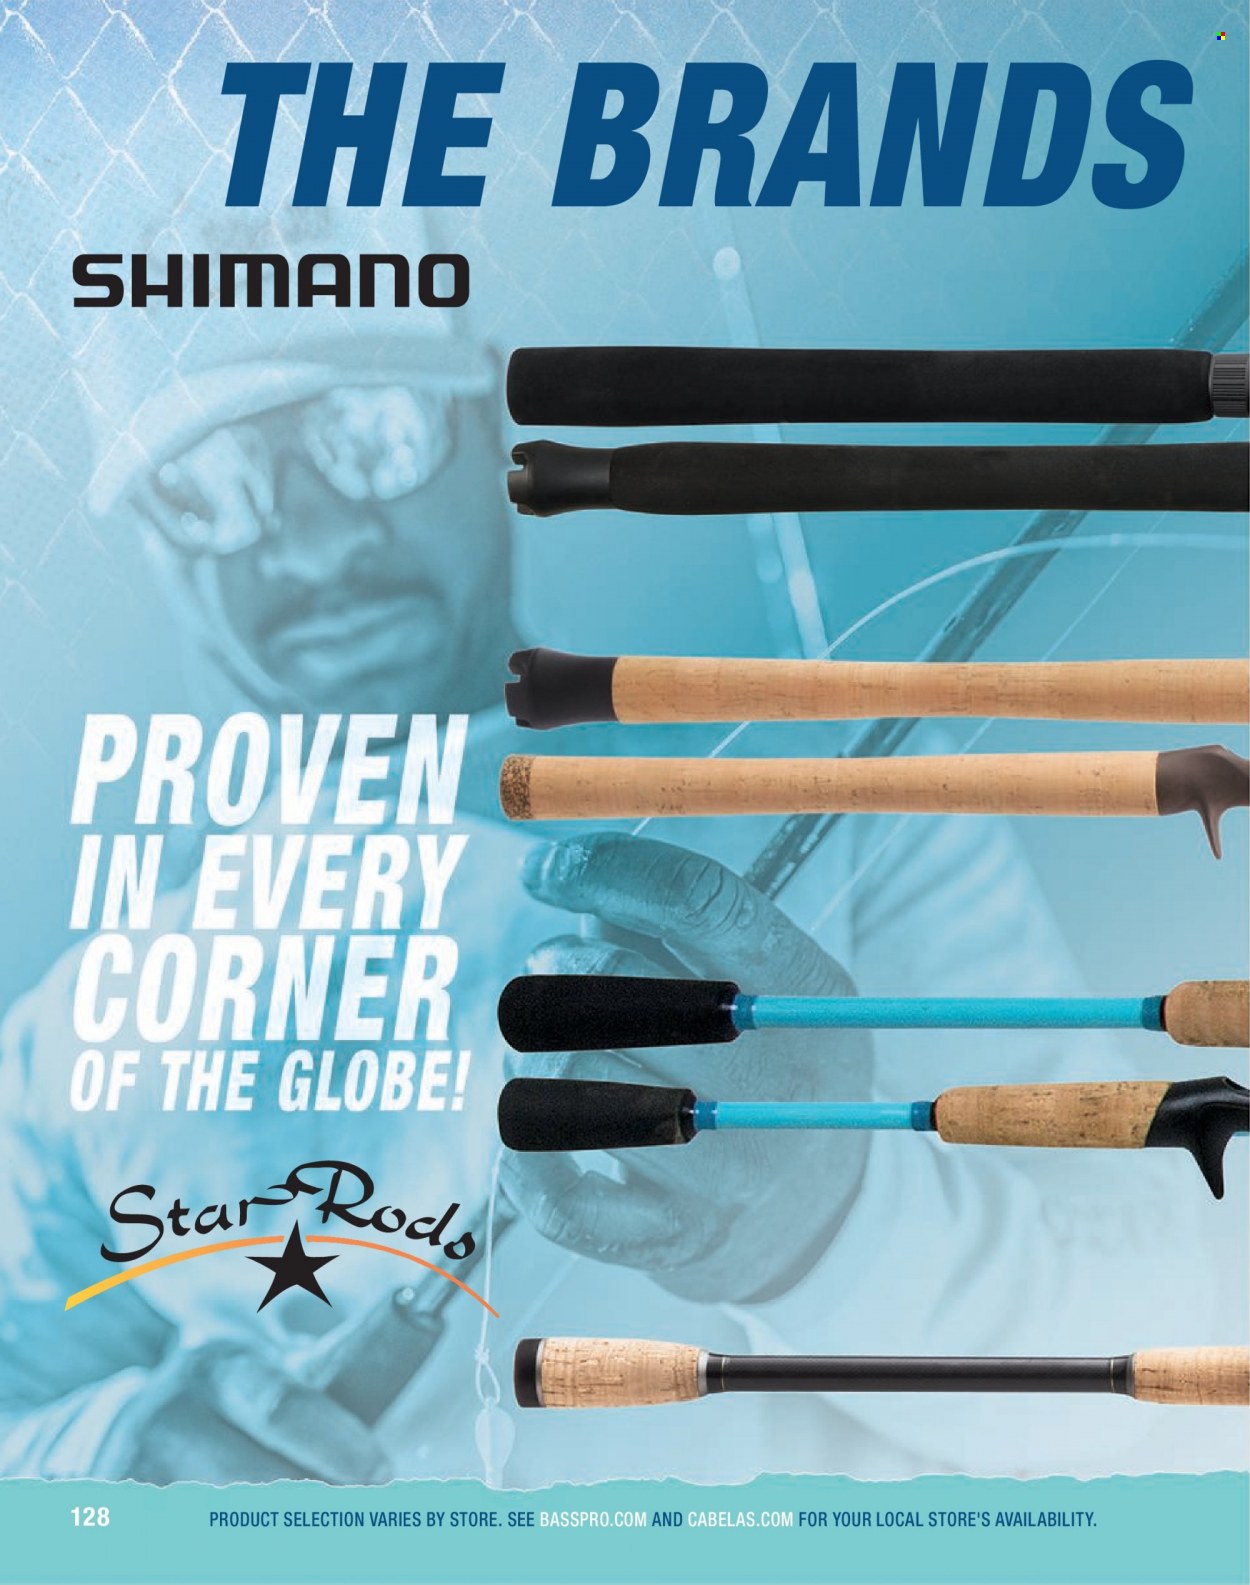 Bass Pro Shops Flyer - Sales products - Shimano, fishing rod. Page 128.